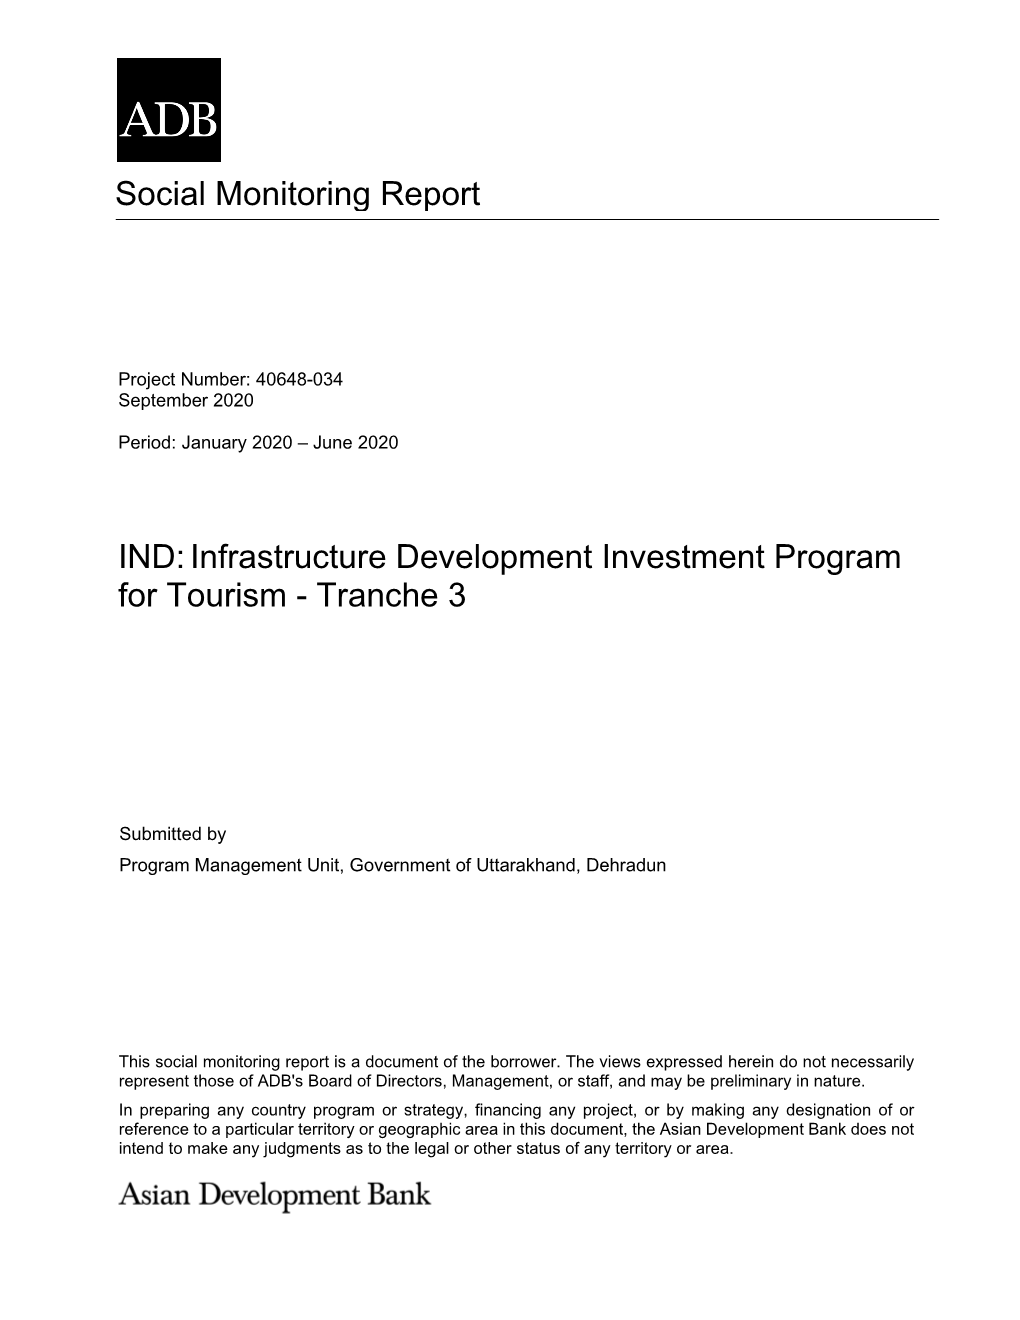 Social Monitoring Report IND:Infrastructure Development